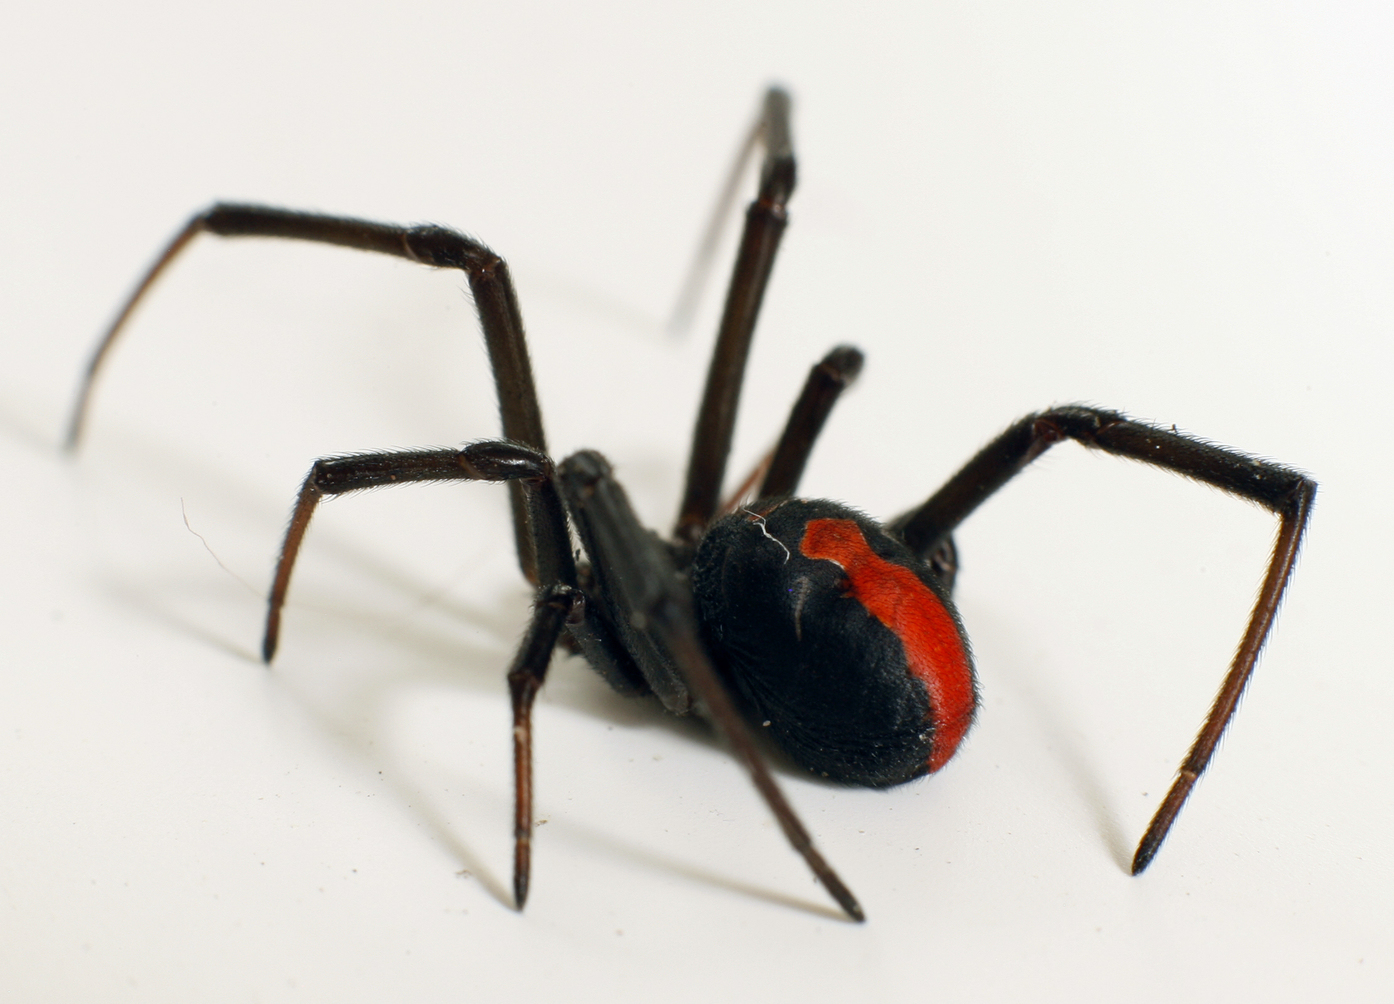 10 Weird Insects Found In Australia Western Allpest Services Pest Control Specialist In